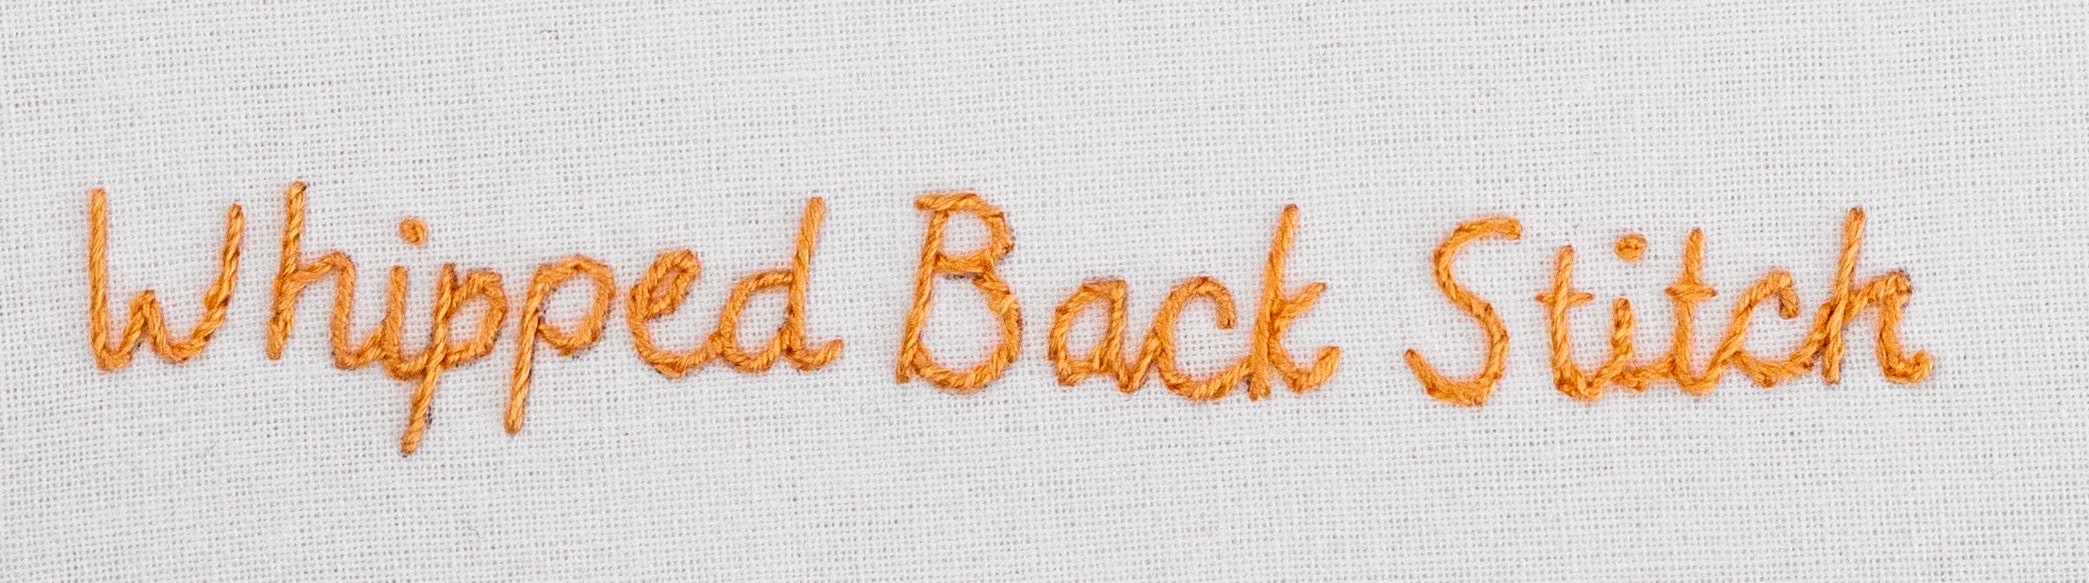 This is an image of a handwritten-looking script stitched in back stitch.